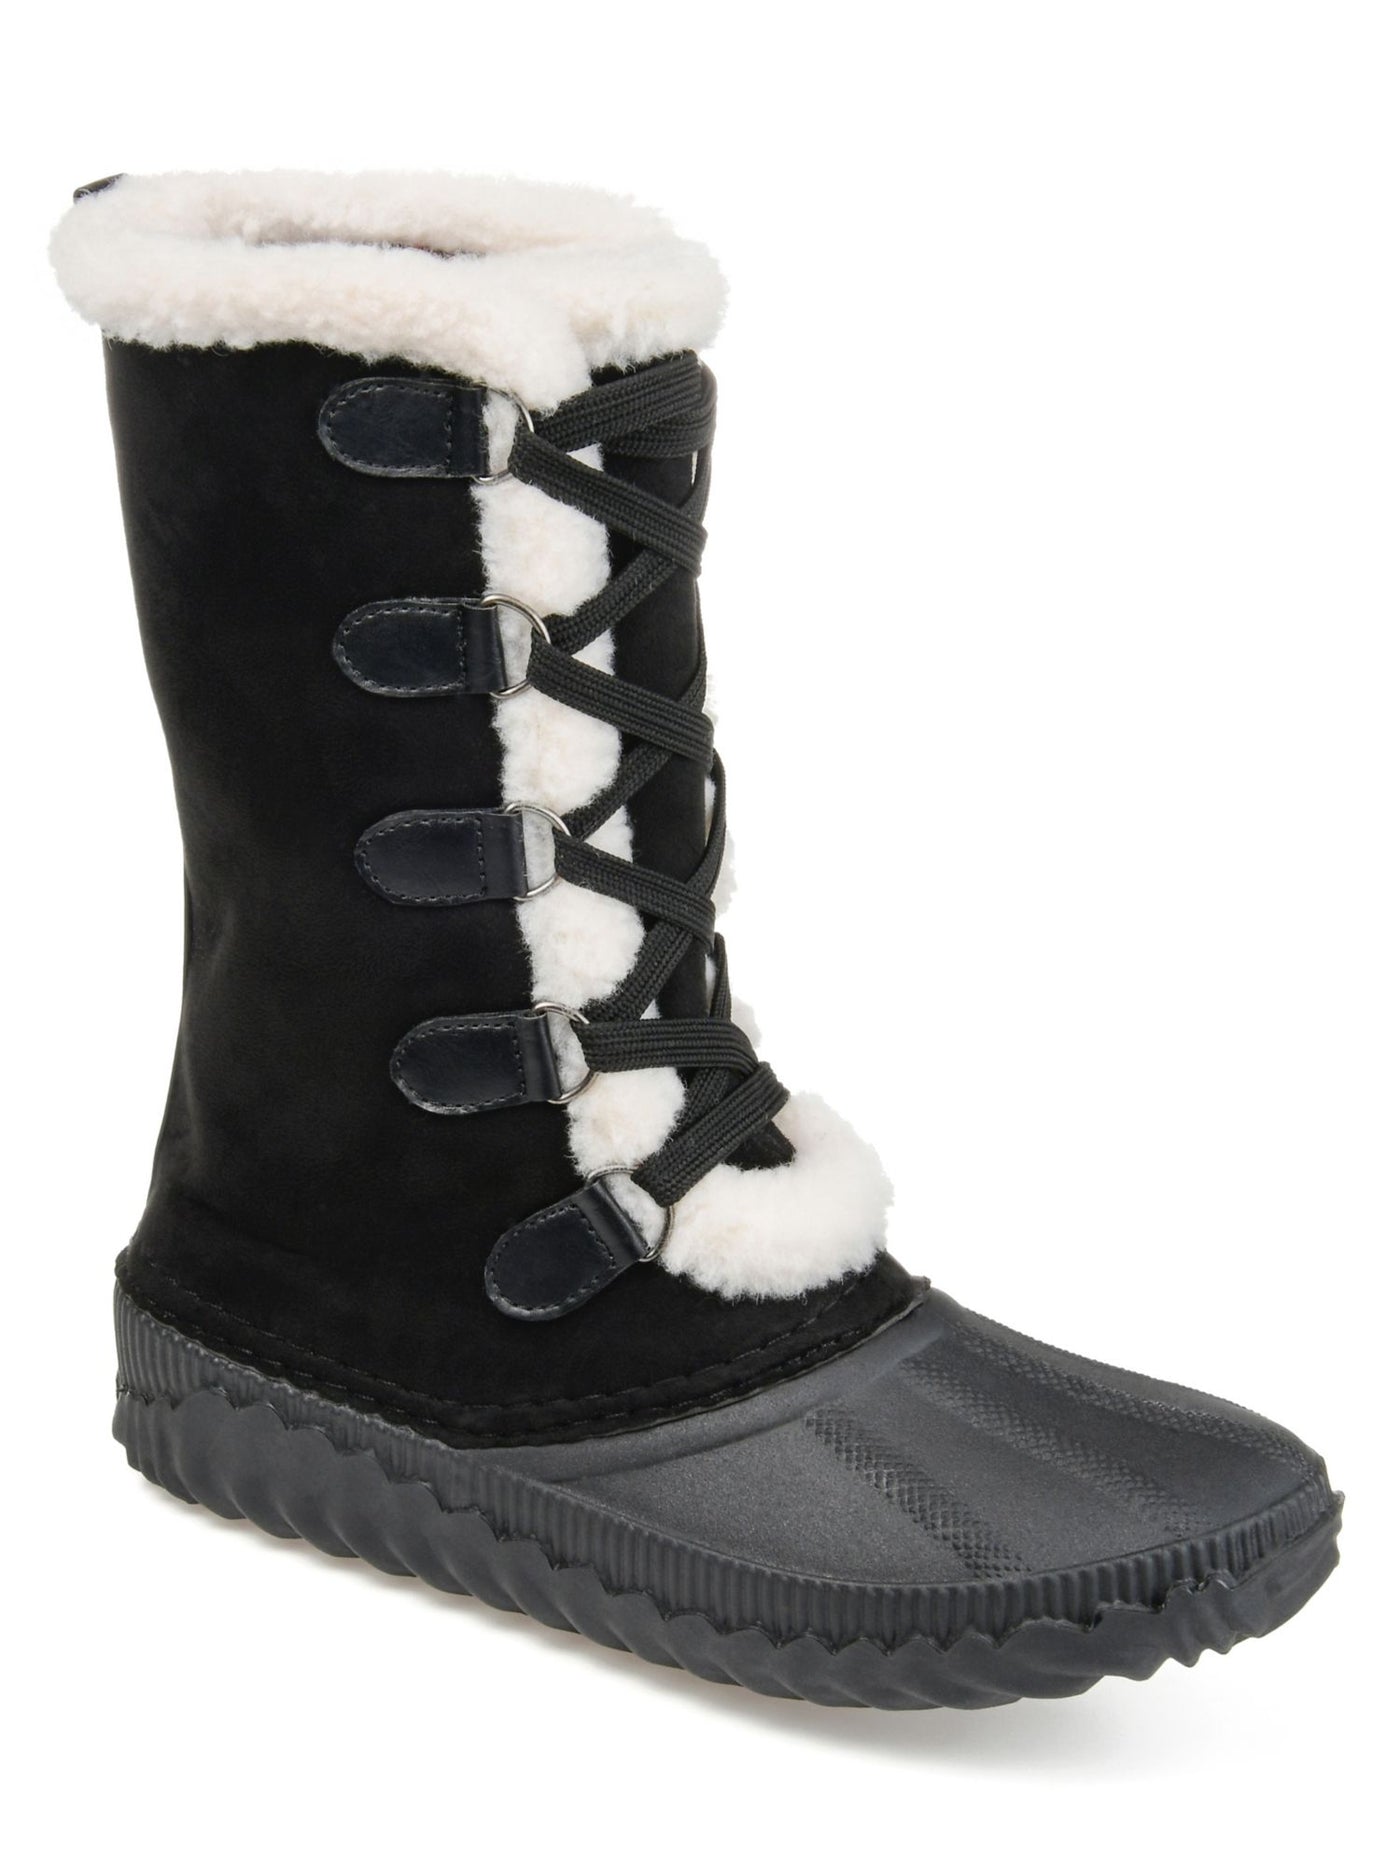 JOURNEE COLLECTION Womens Black Two-Toned Insulated Waterproof Round Toe Lace-Up Snow Boots 10